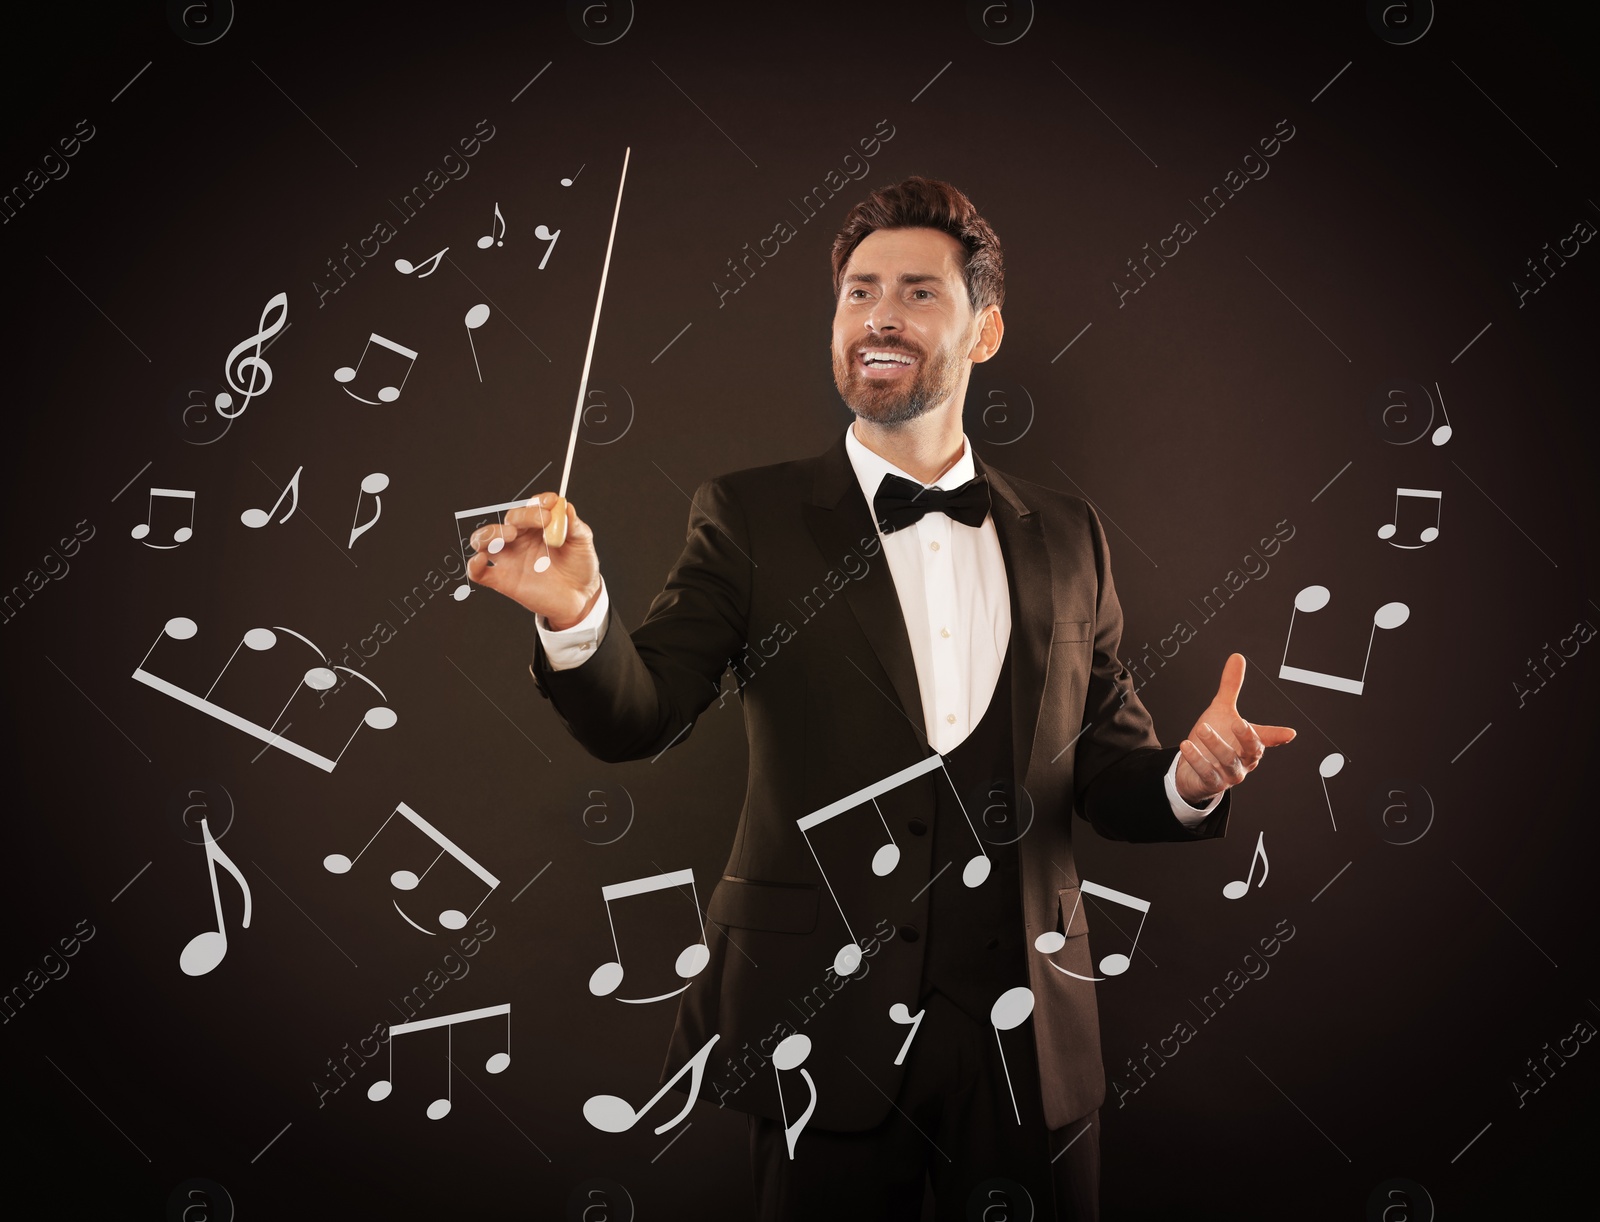 Image of Conductor on dark background. Music notes flying from baton